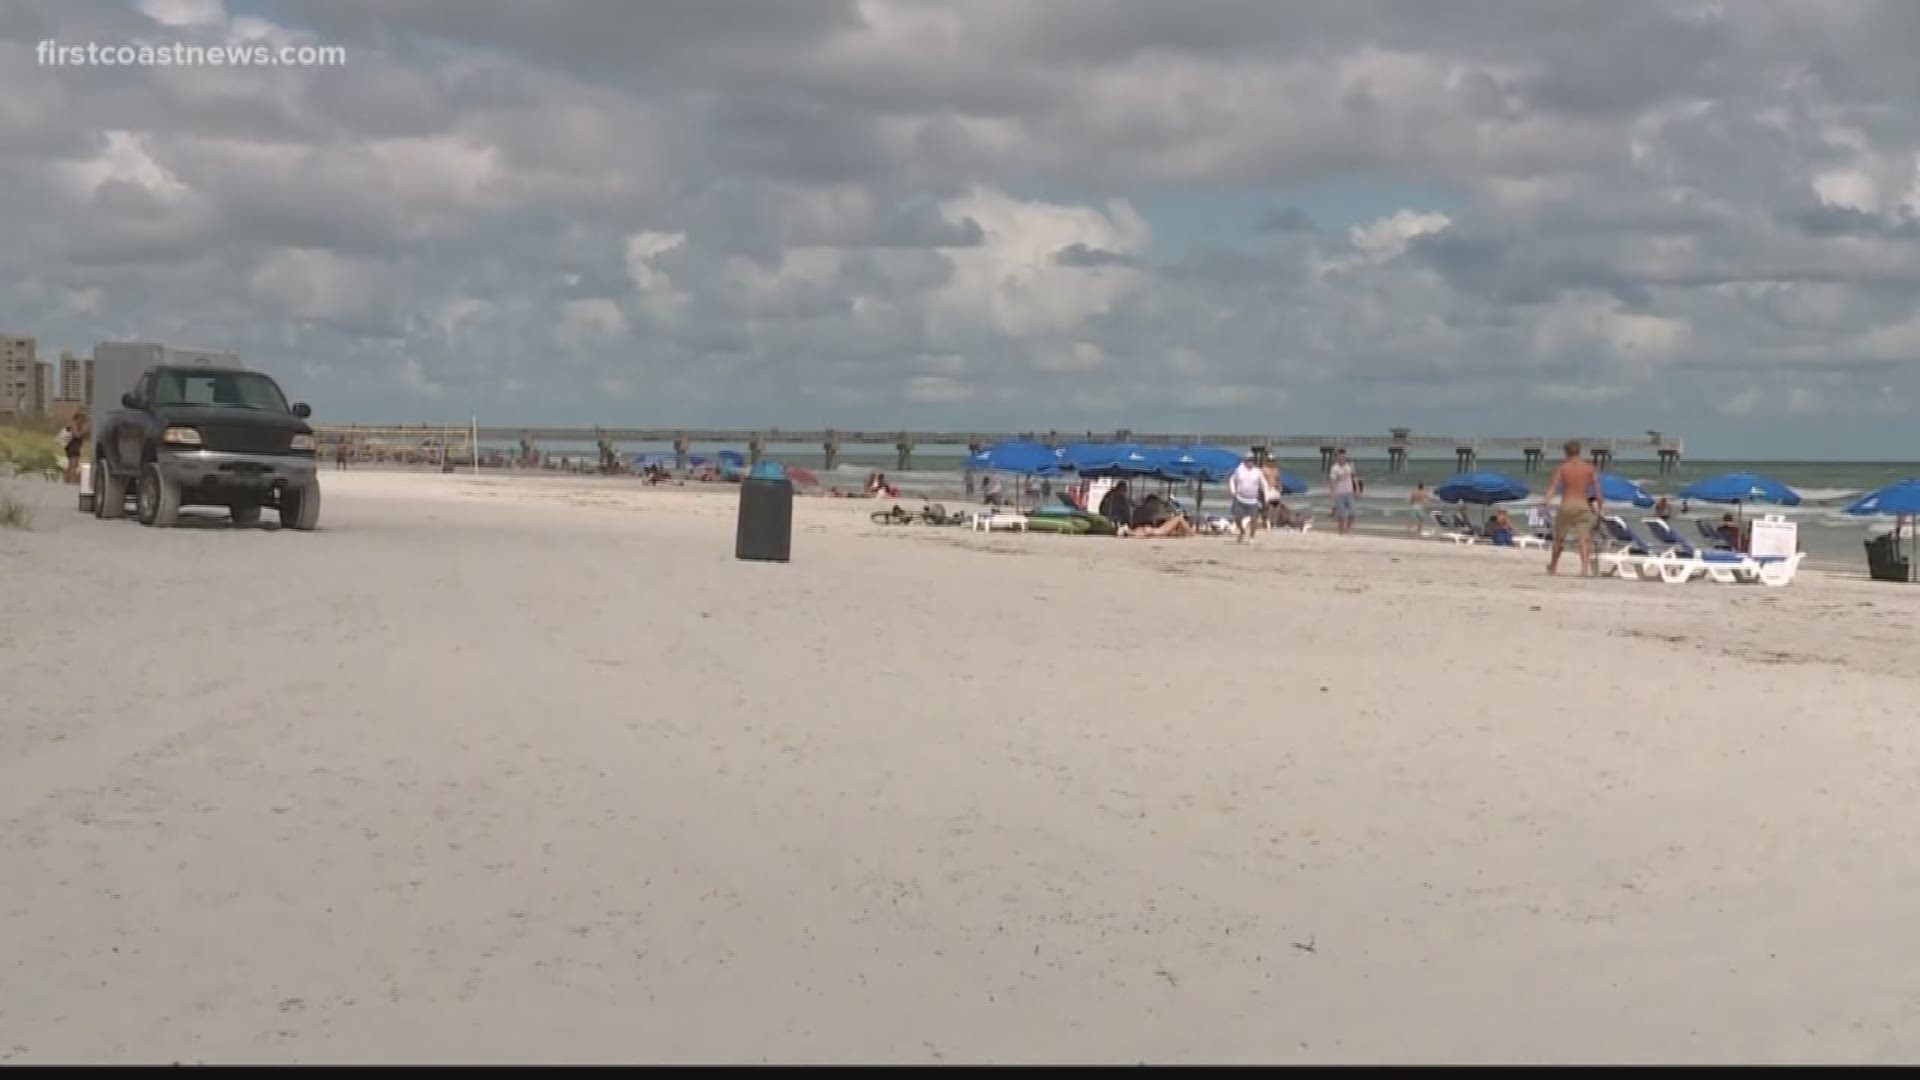 One person was transported to the hospital in extremely critical condition and the other was transported in stable condition, Jacksonville Beach lifeguards said.